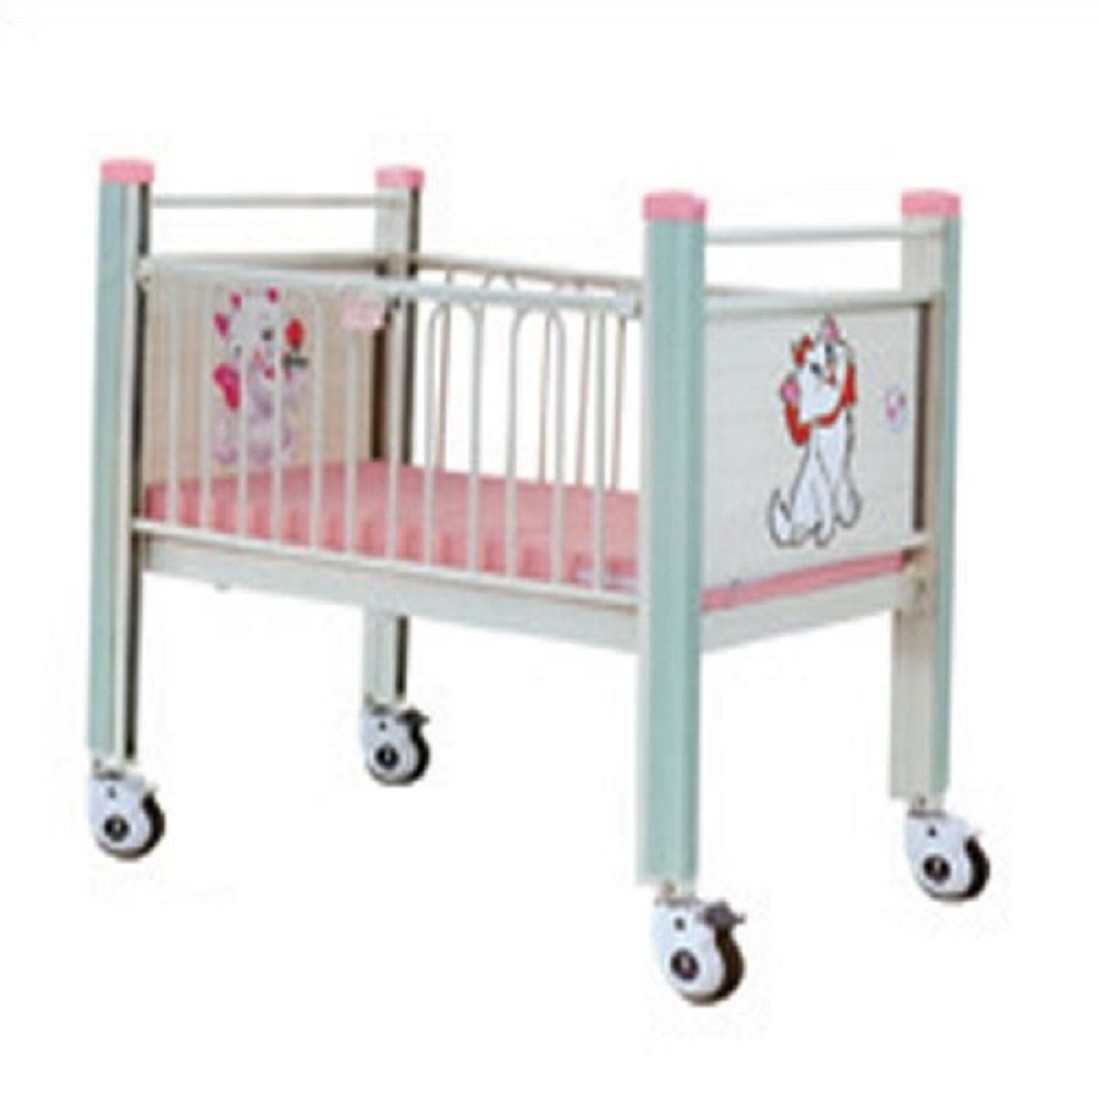  CE Single Crank Manual H58mm Hospital Baby Bed Manufactures